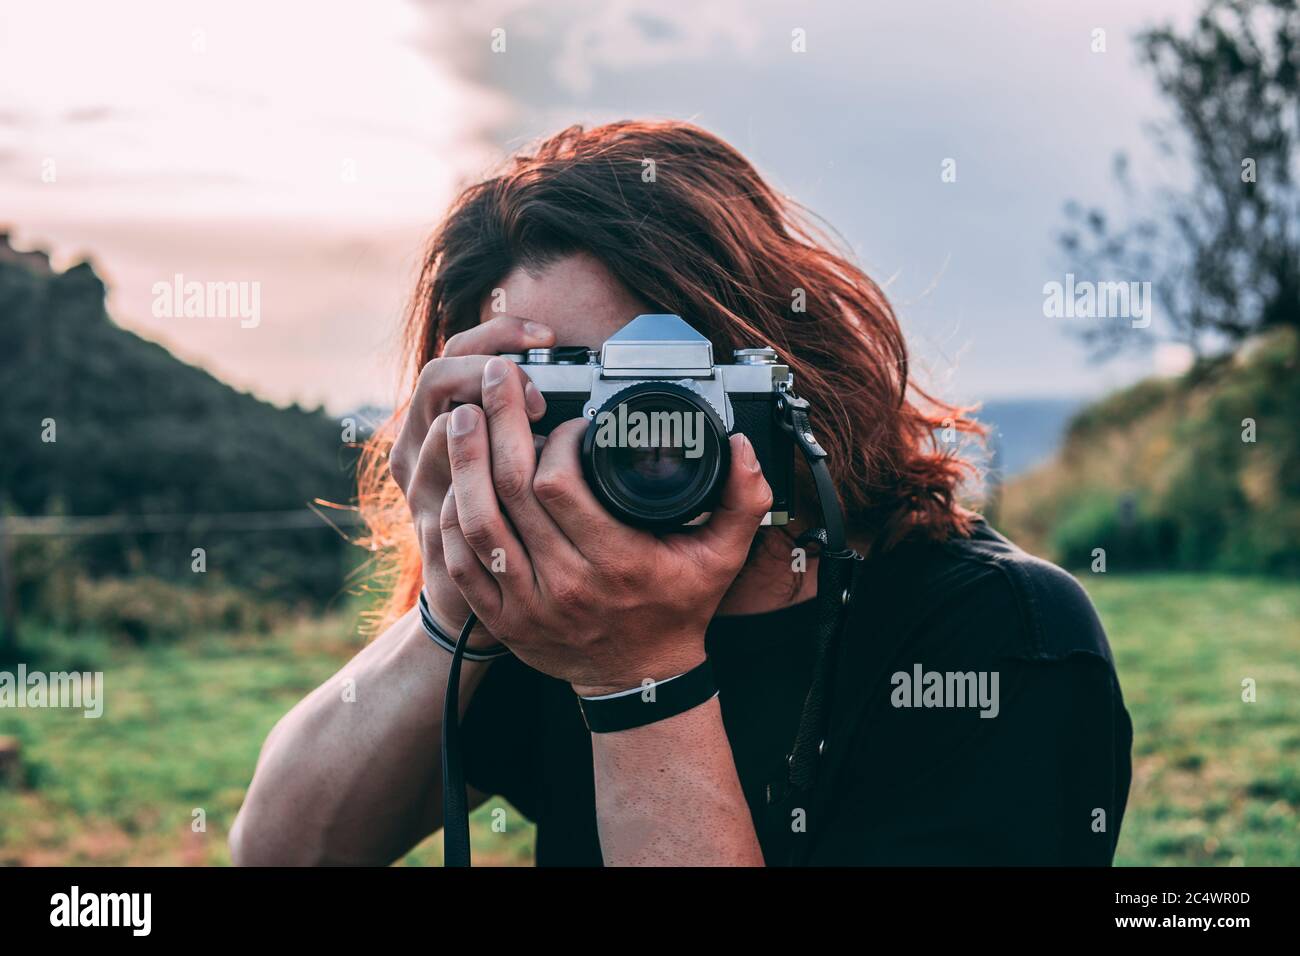 Handsome young man takes a picture facing the camera. He is in the middle of nature and has long and wild hair. Stock Photo